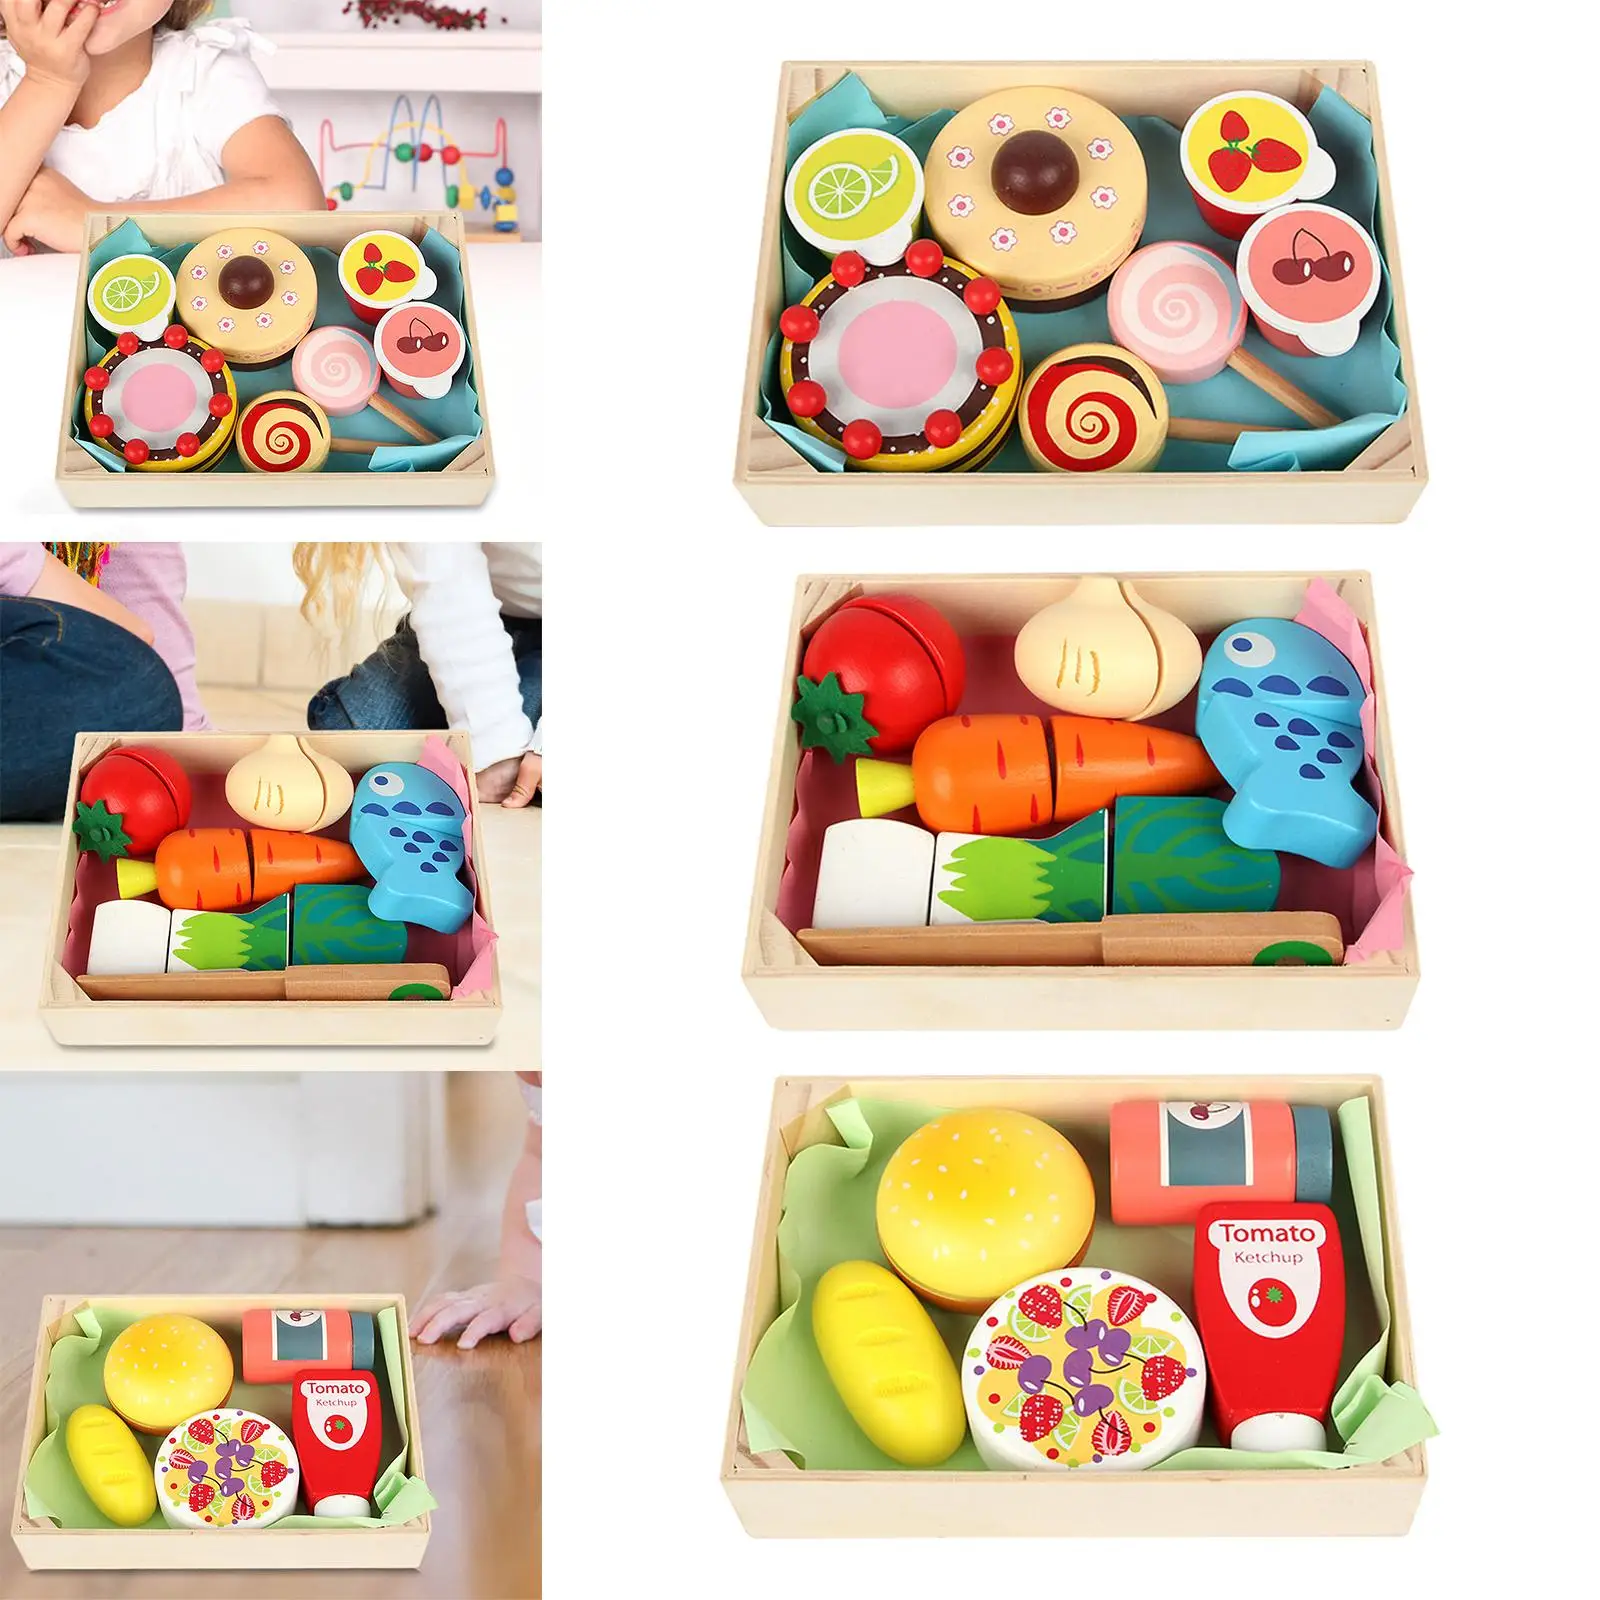 Food Hands on Ability Educational Toys for Girls Kids Birthday Gifts